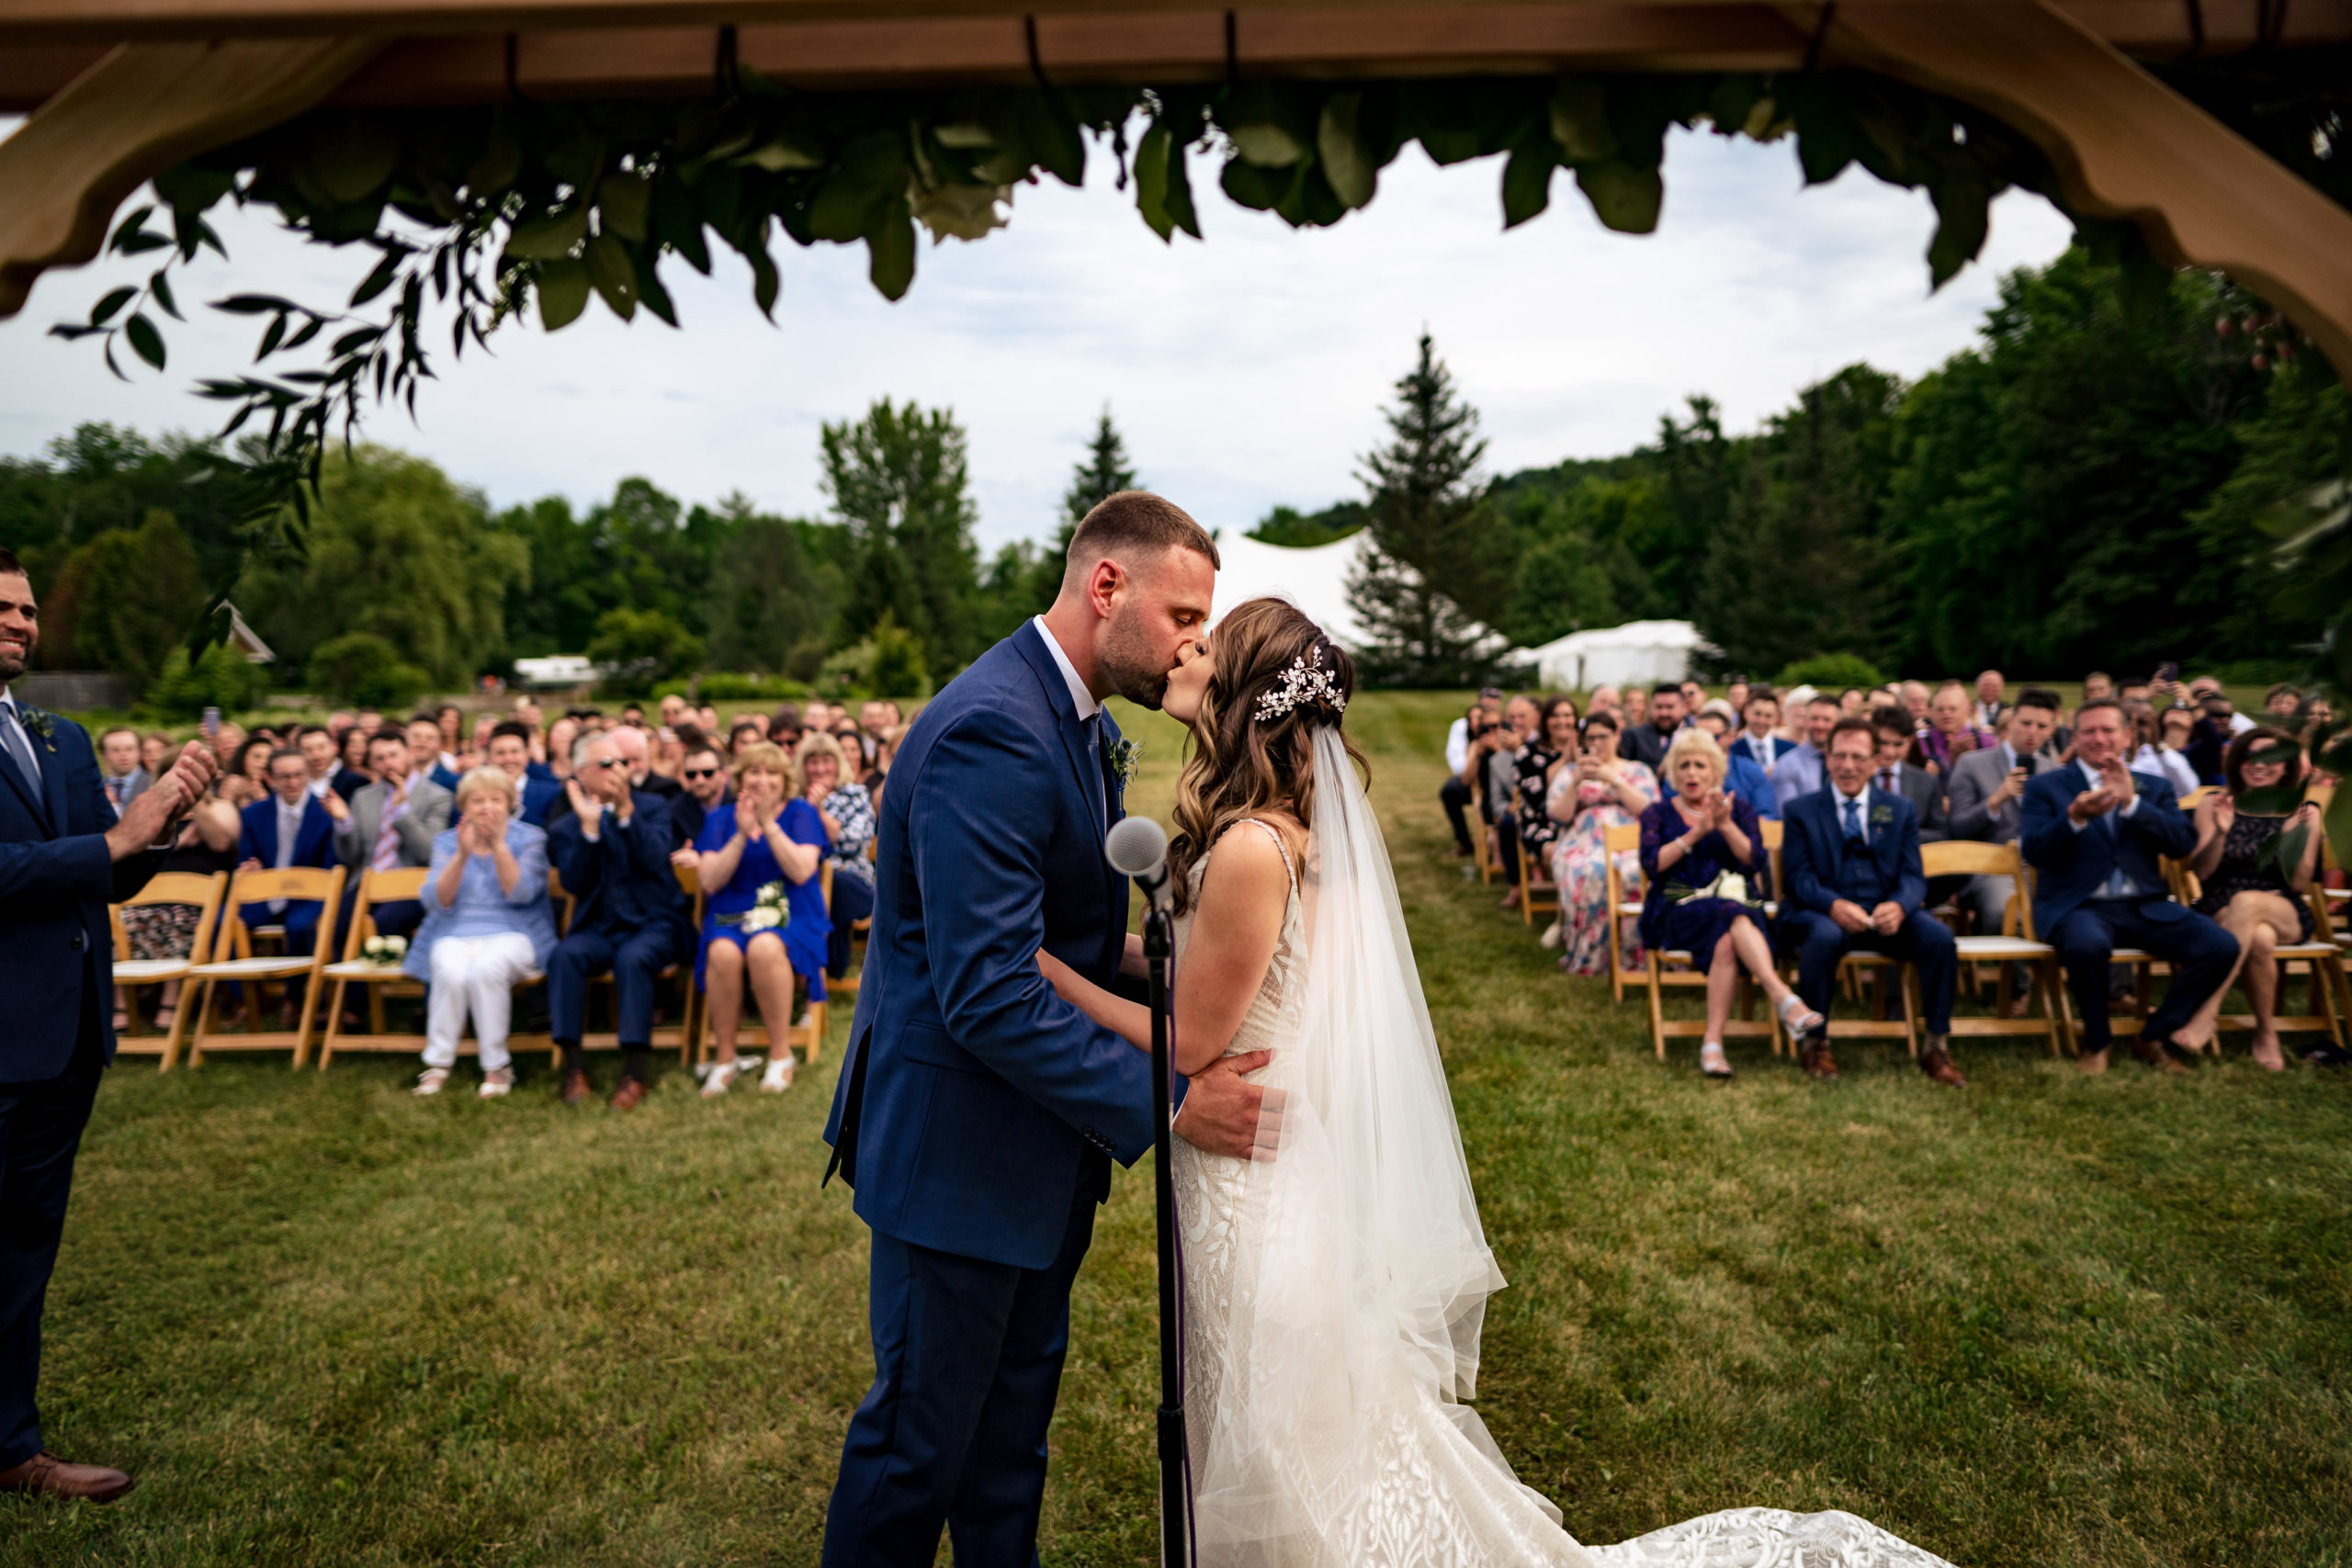 bride and groom's first kiss, looking at outdoor wedding ceremony crowd at Topnotch Resort, Stowe Vermont